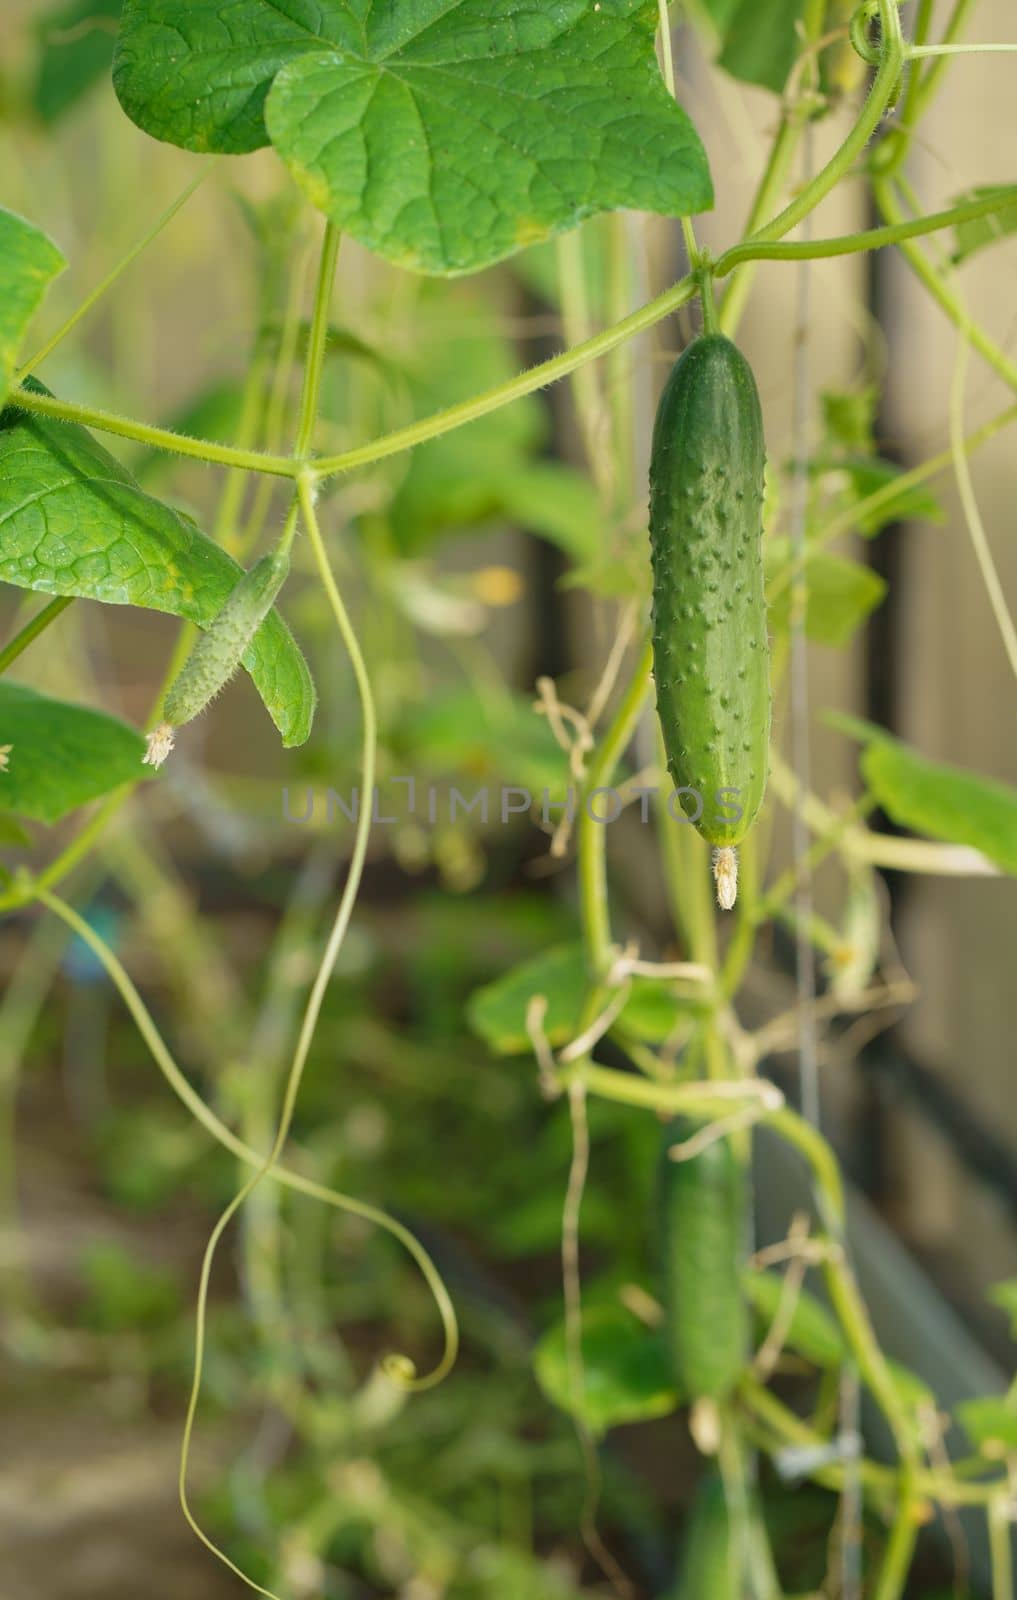 Small and large cucumbers growing in the garden on a special grid, flowering vegetables, harvest by aprilphoto